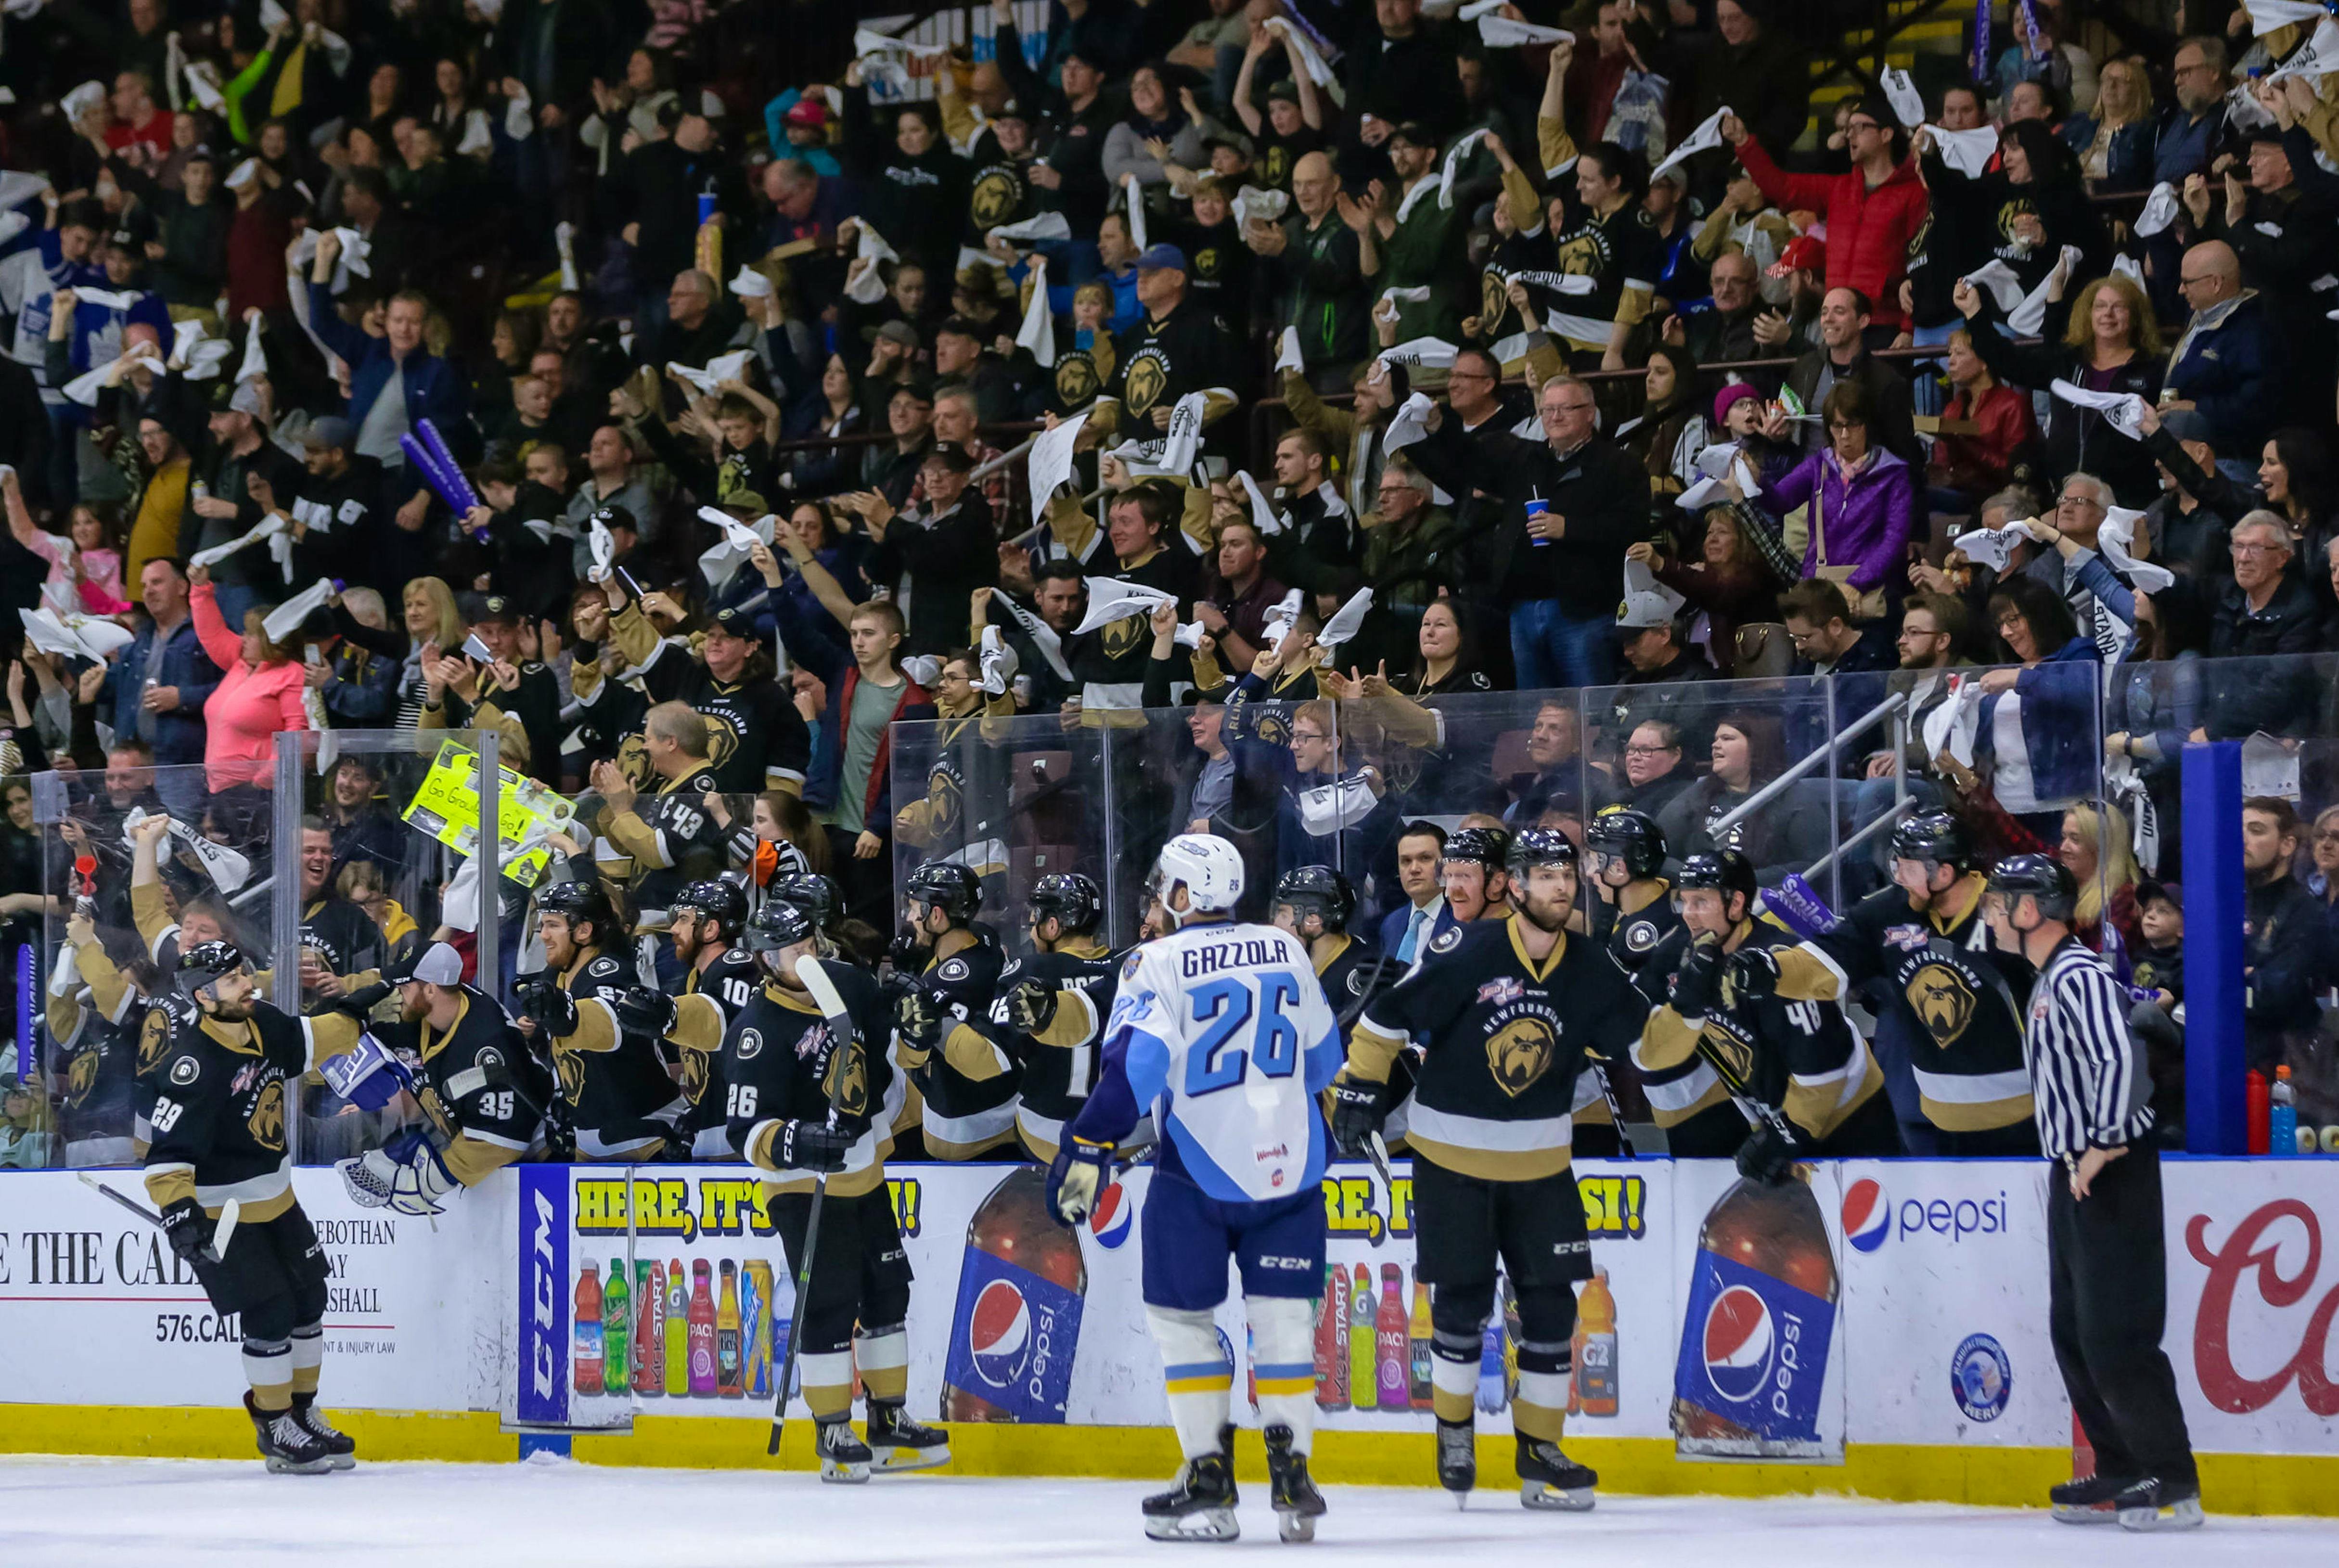 Newfoundland Growlers give local hockey fans an inaugural season to cheer  for 